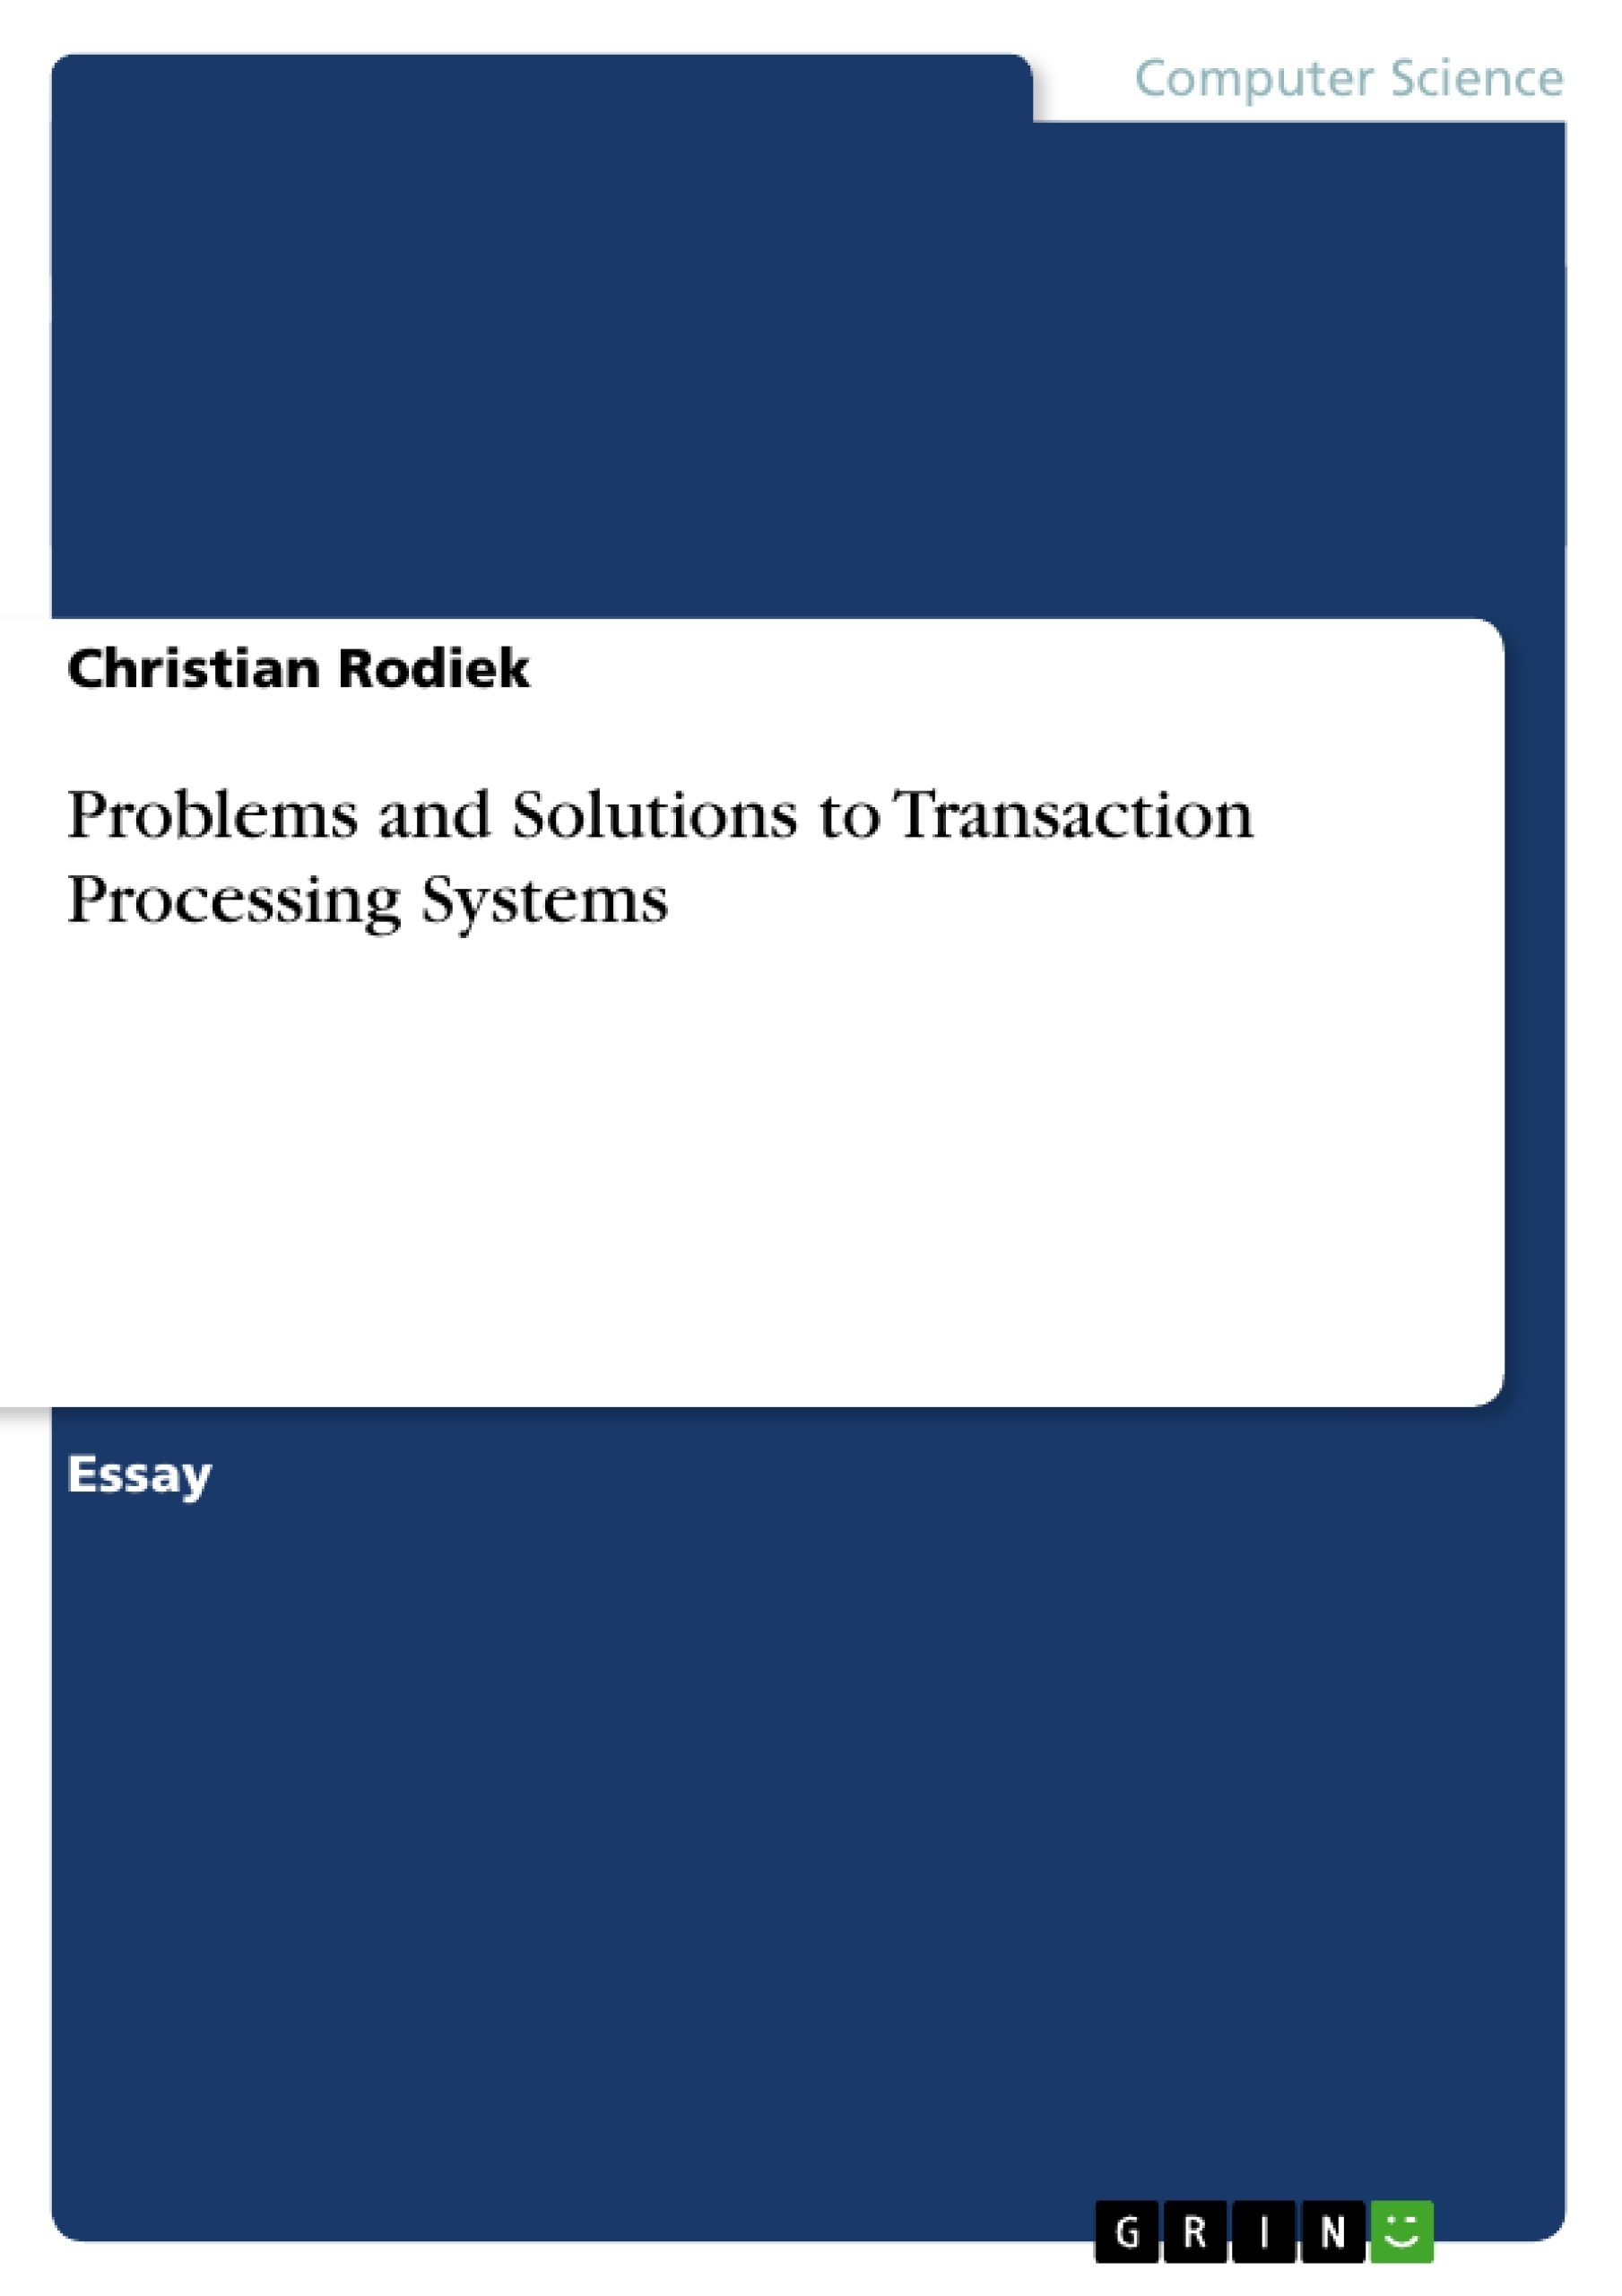 Title: Problems and Solutions to Transaction Processing Systems